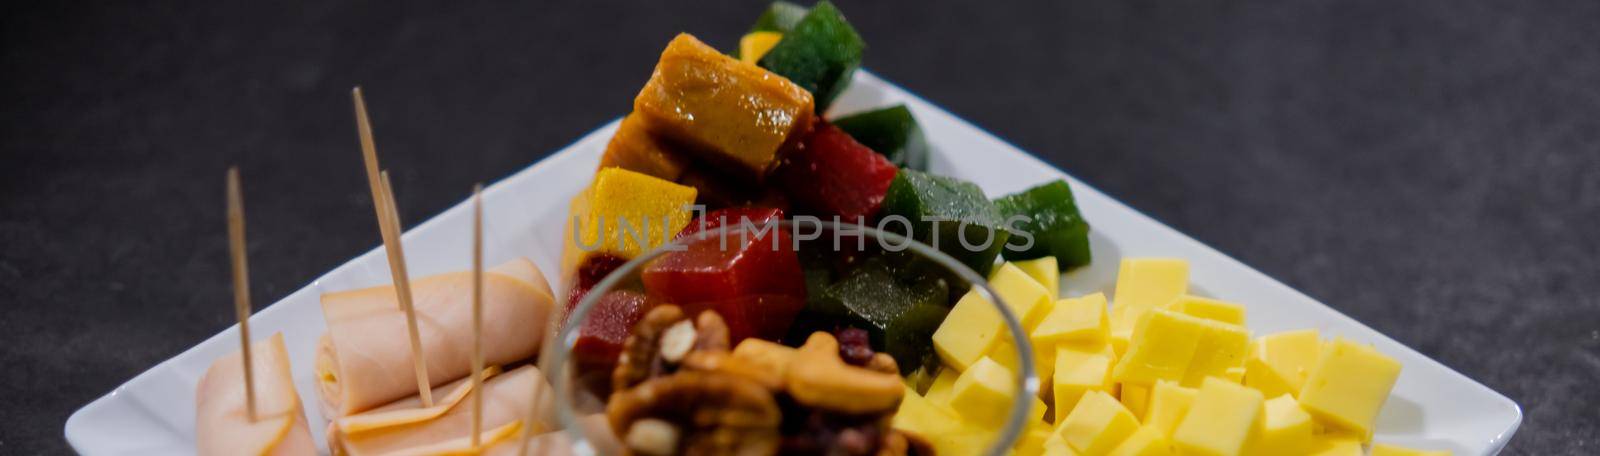 Wide view of turkey ham rolls, diced fruit paste, cheddar cheese cubes, and glass of walnuts on square white plate. Turkey meat, colorful Mexican candy, and nuts above black surface. Healthy snacks